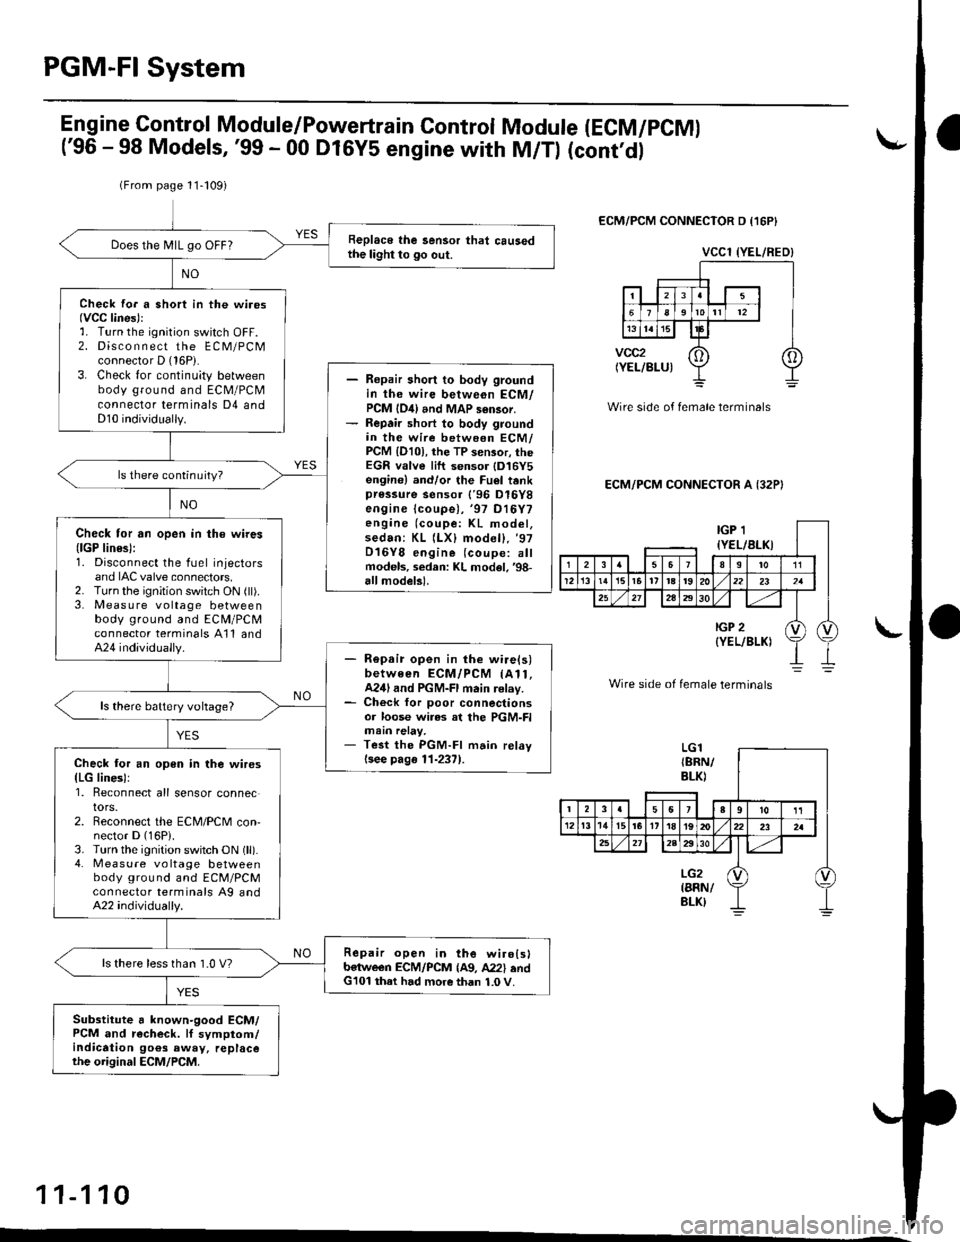 HONDA CIVIC 1999 6.G User Guide PGM-FI System
(From page 11-109)
Replace the sensor that causedthe light to go out.Does the N4lL go OFF?
Check fo. a short in the wi.os(VCC lines)::. Turn the ignition switch OFF.2. Disco n n ect the